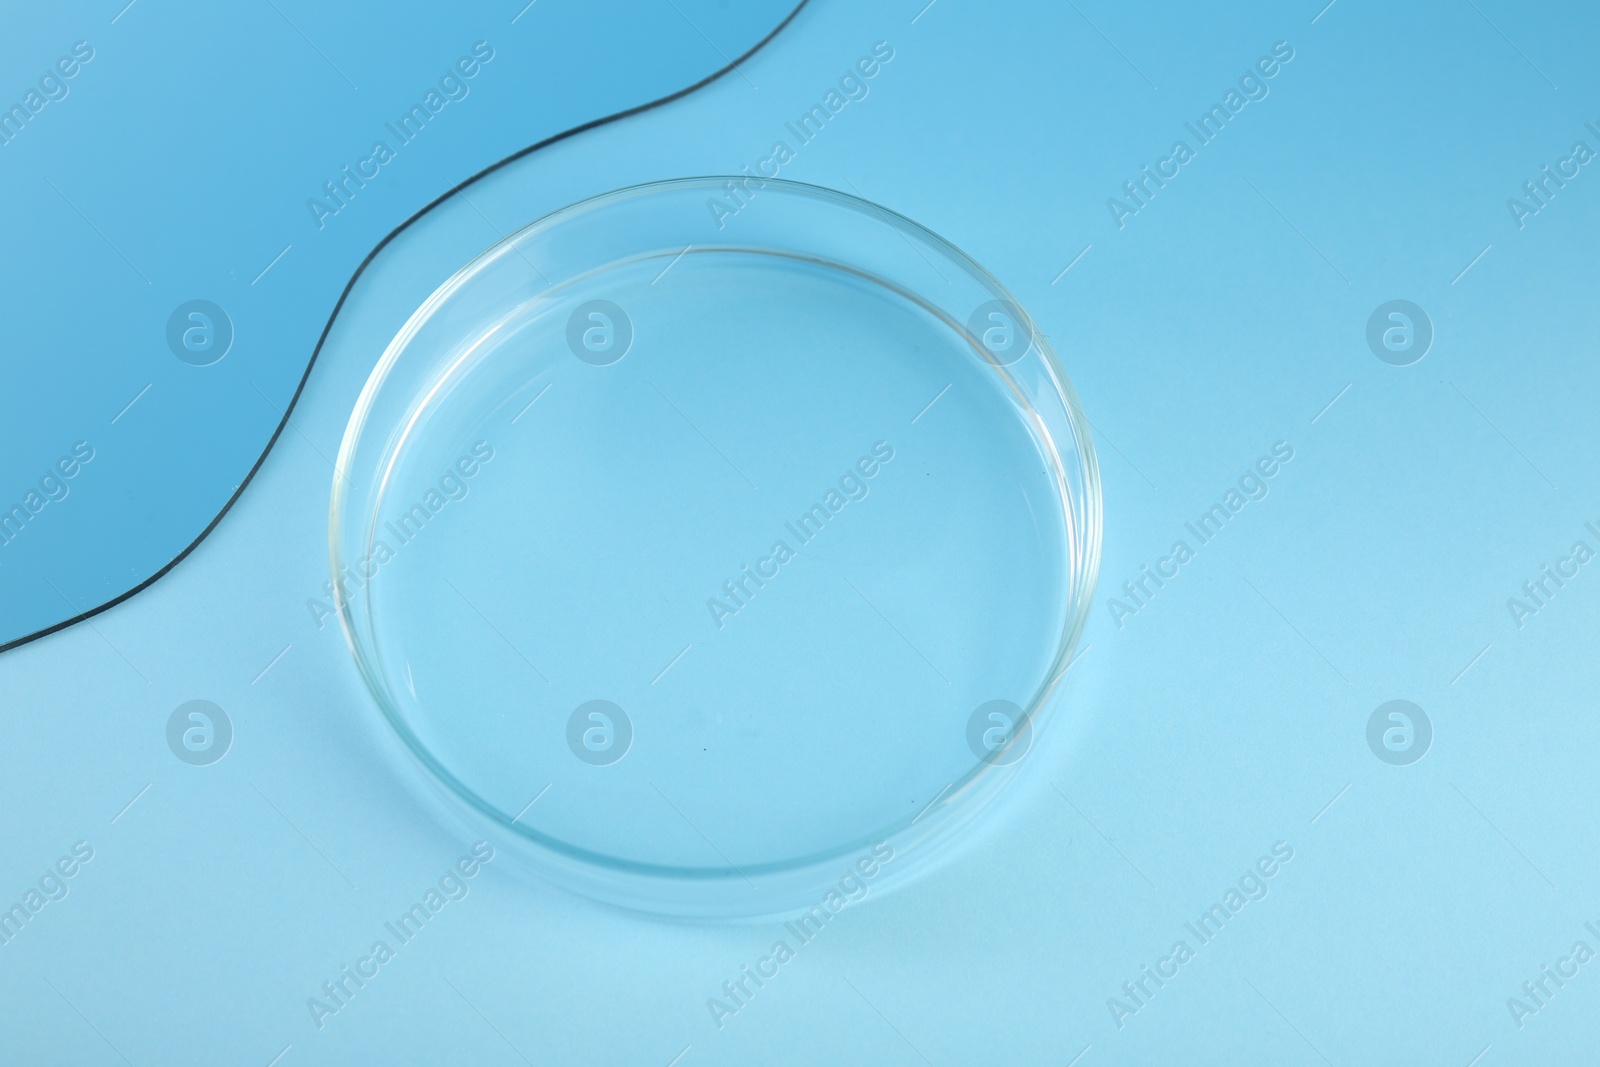 Photo of Empty petri dish on light blue background, above view